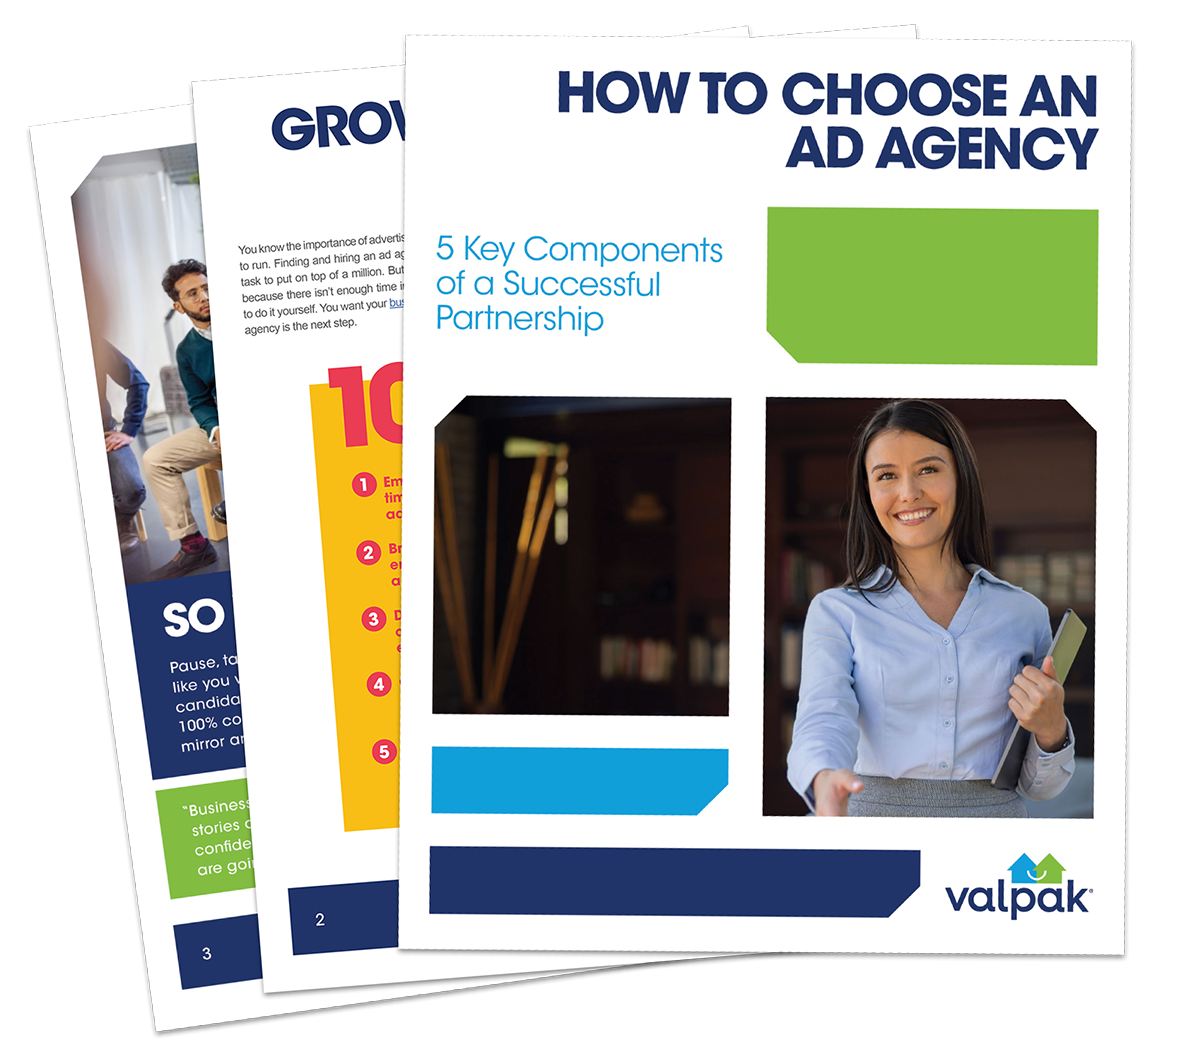 How to choose an ad agency